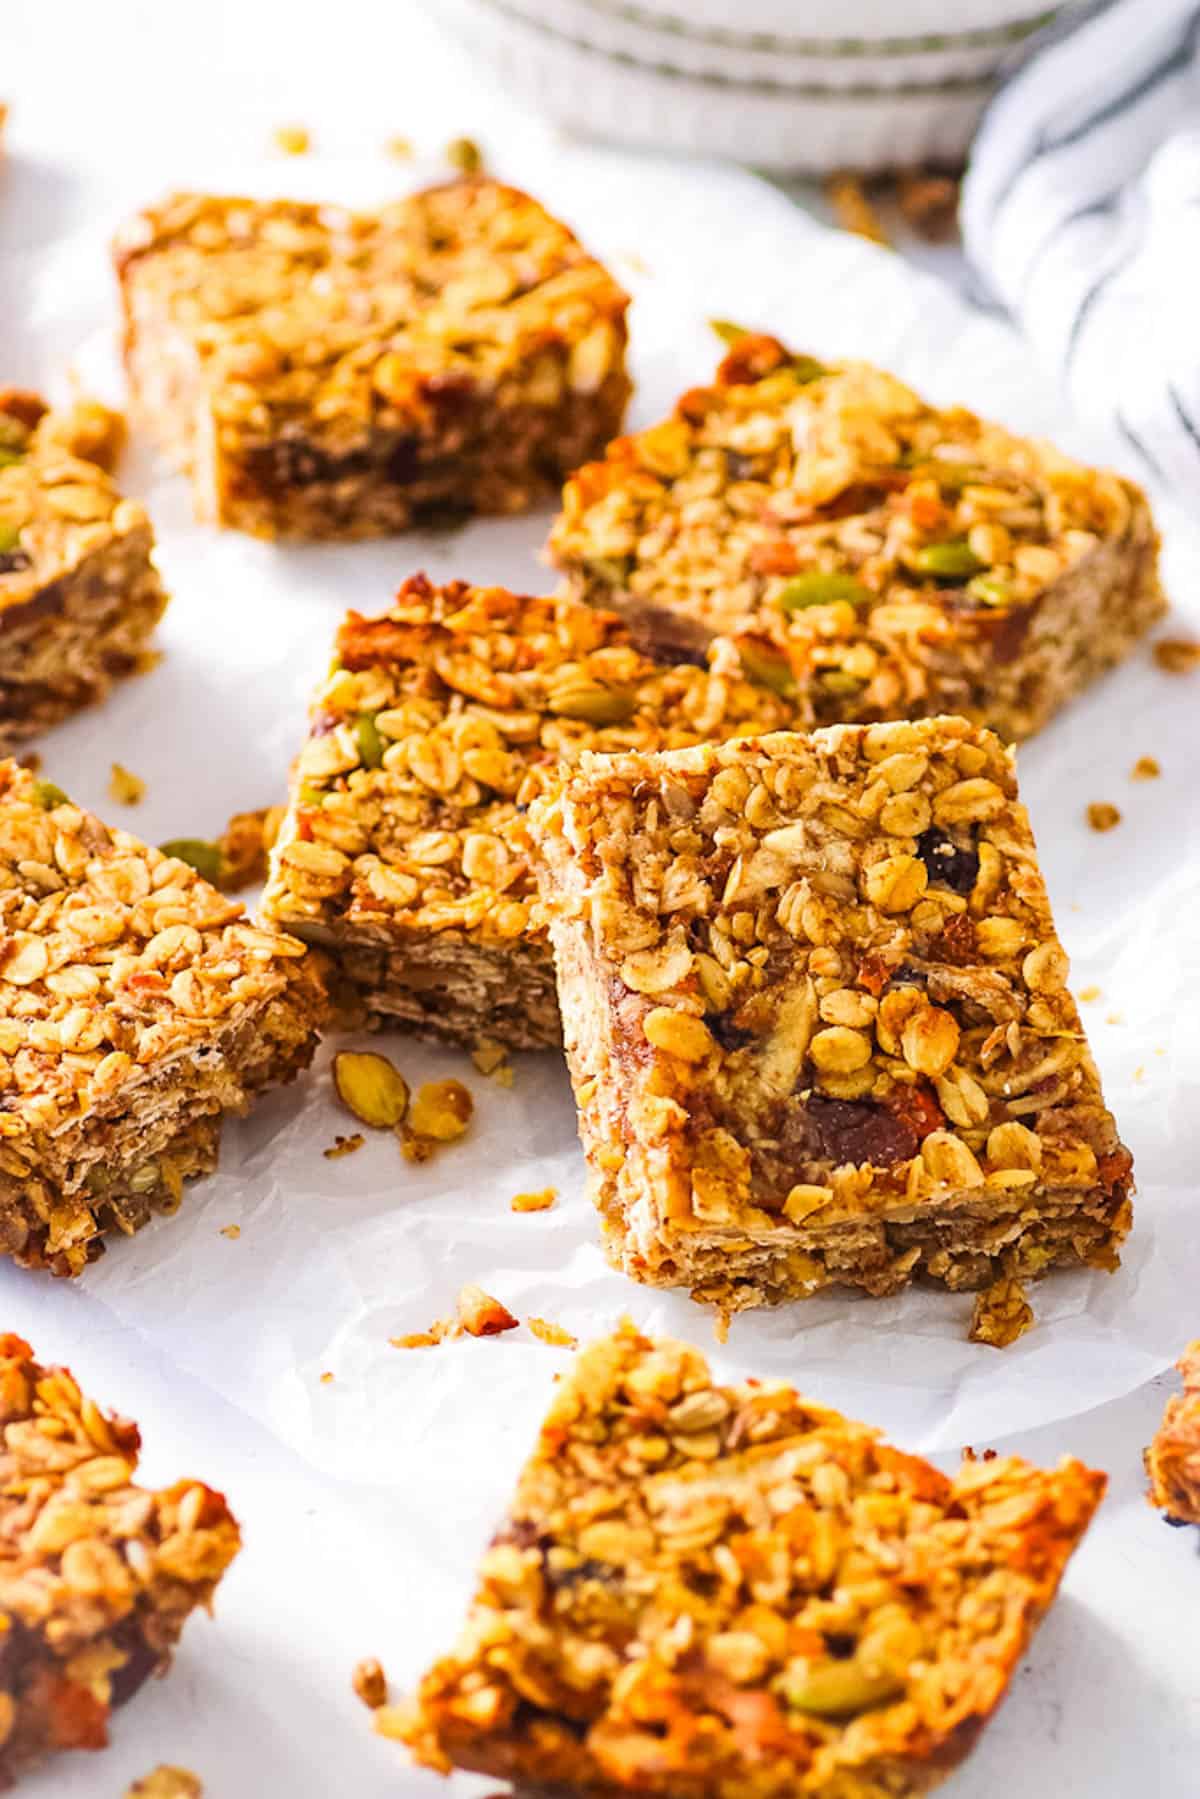 Healthy Flapjacks | The Picky Eater [Video]